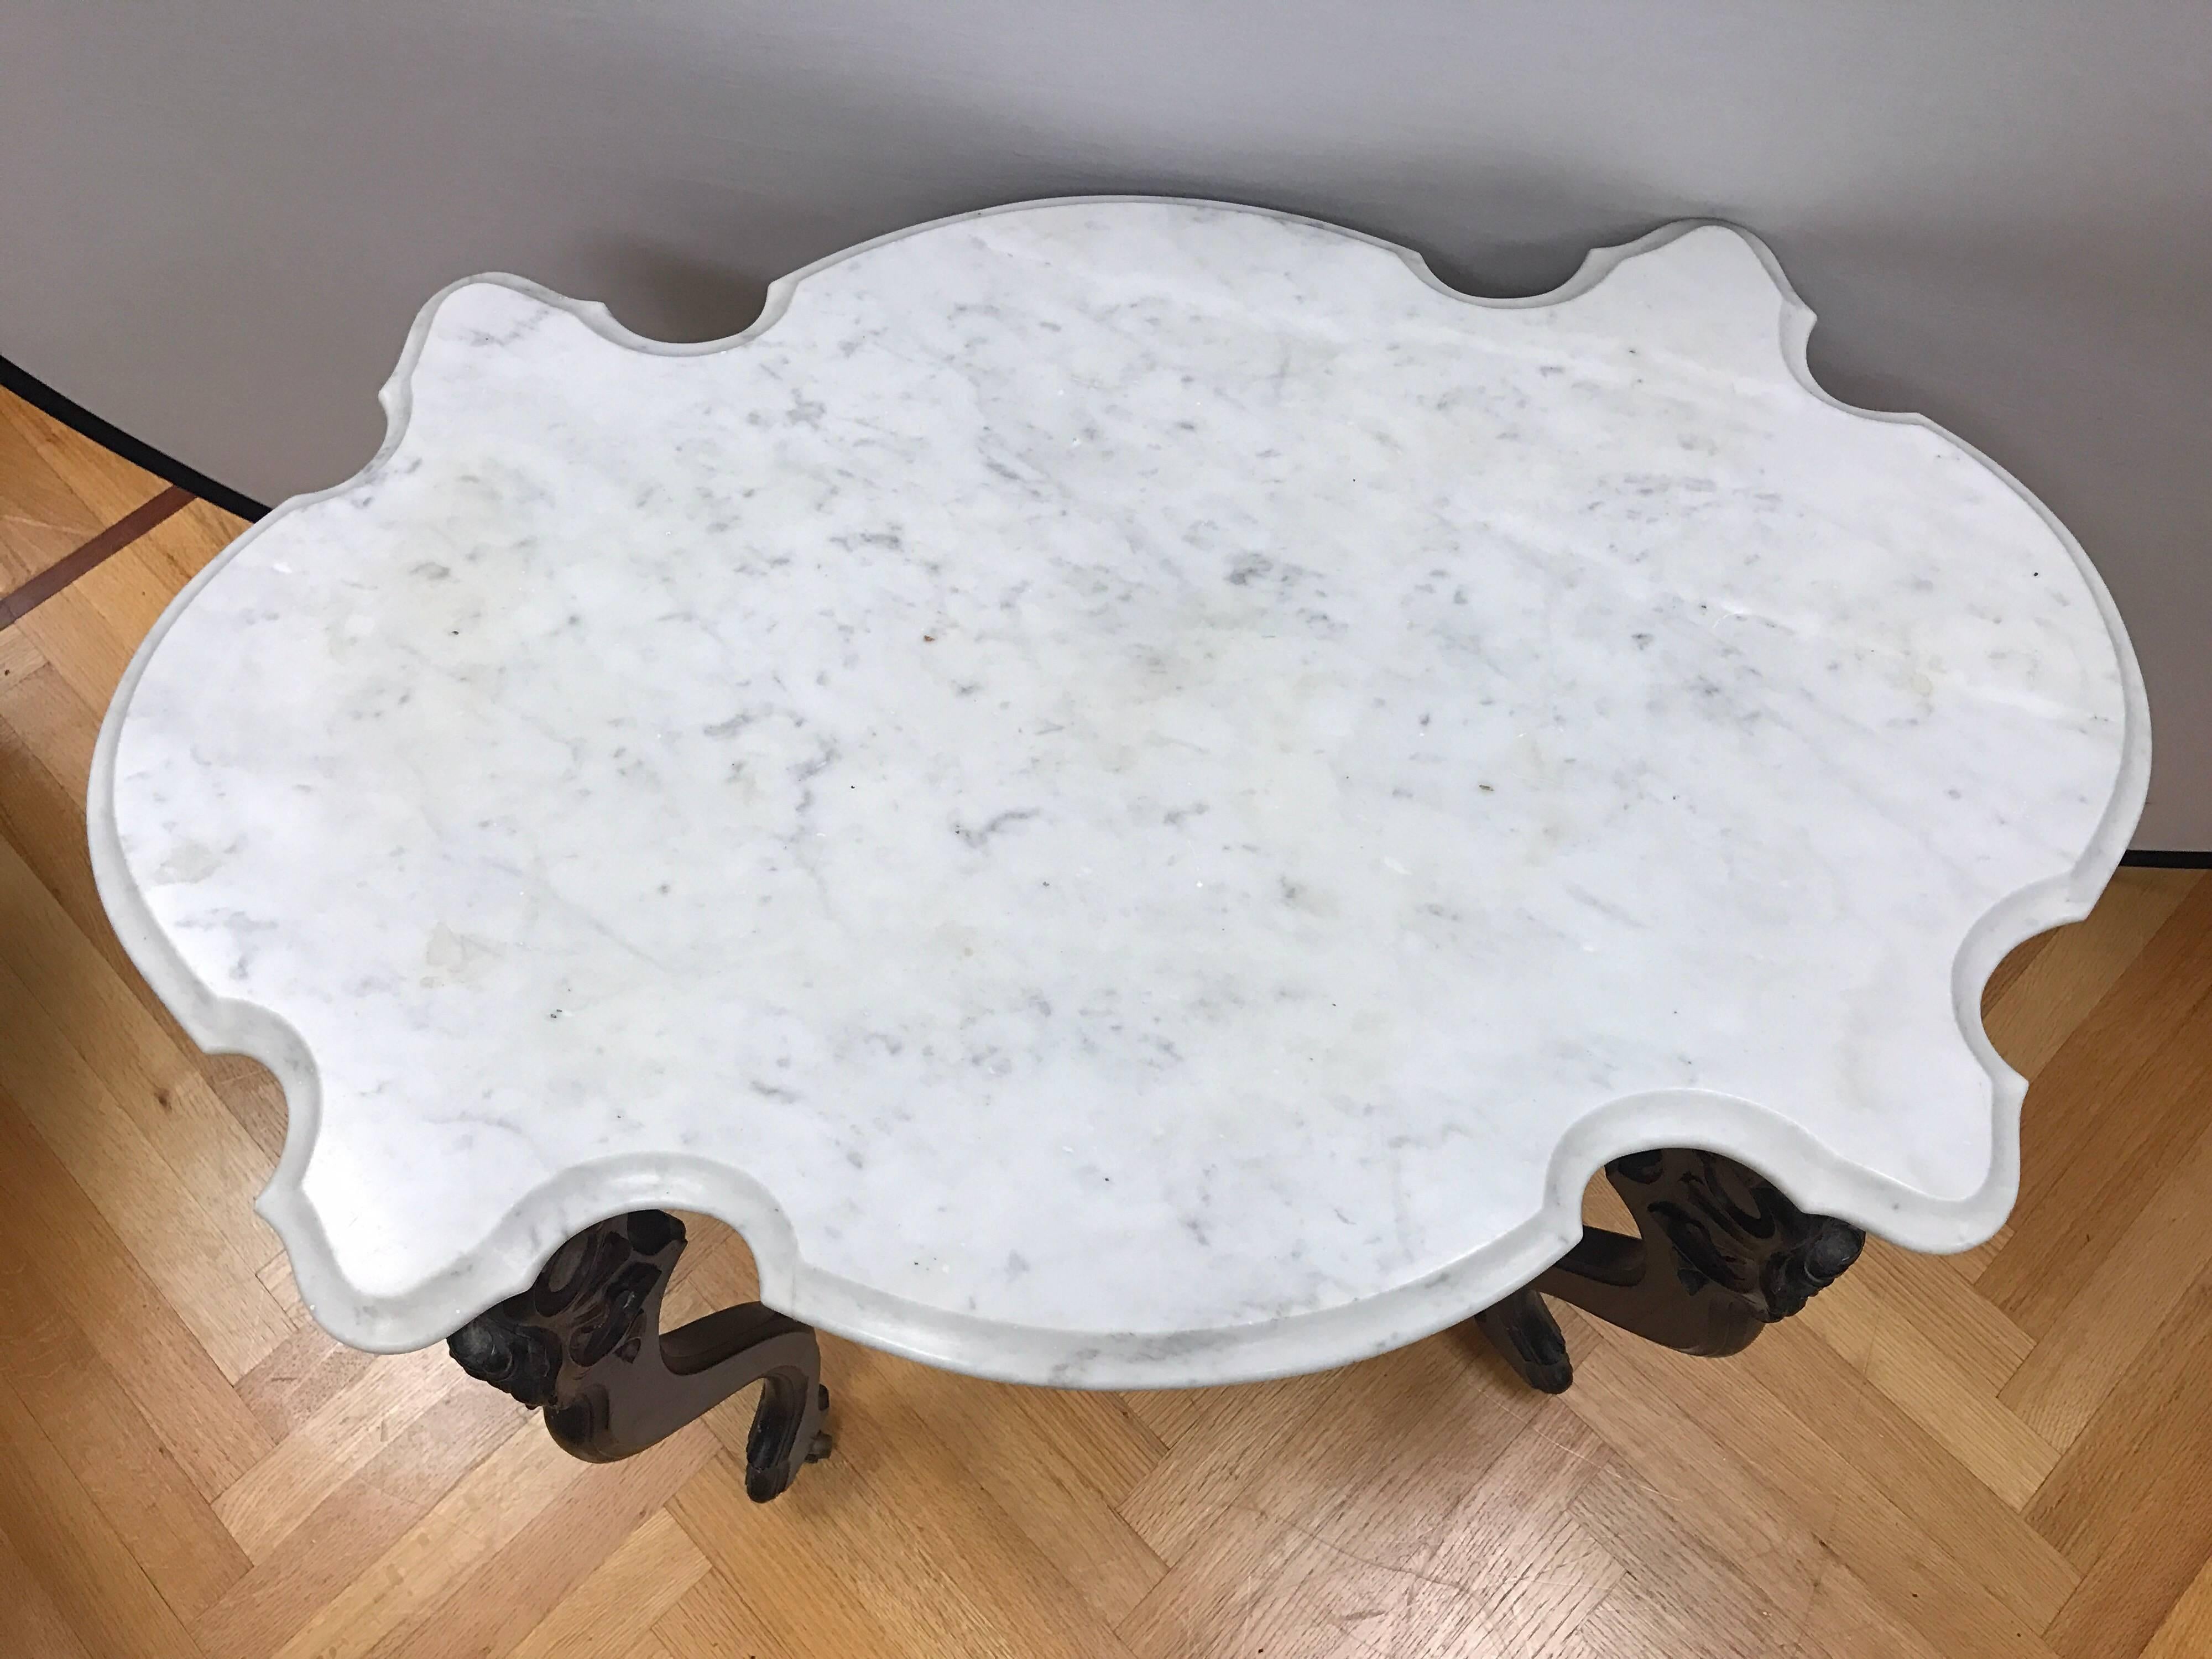 19th century Victorian walnut table with intricate carved detail on base. Top is white marble with grey veining and has a bevelled edge. Has castors for ease of movement.